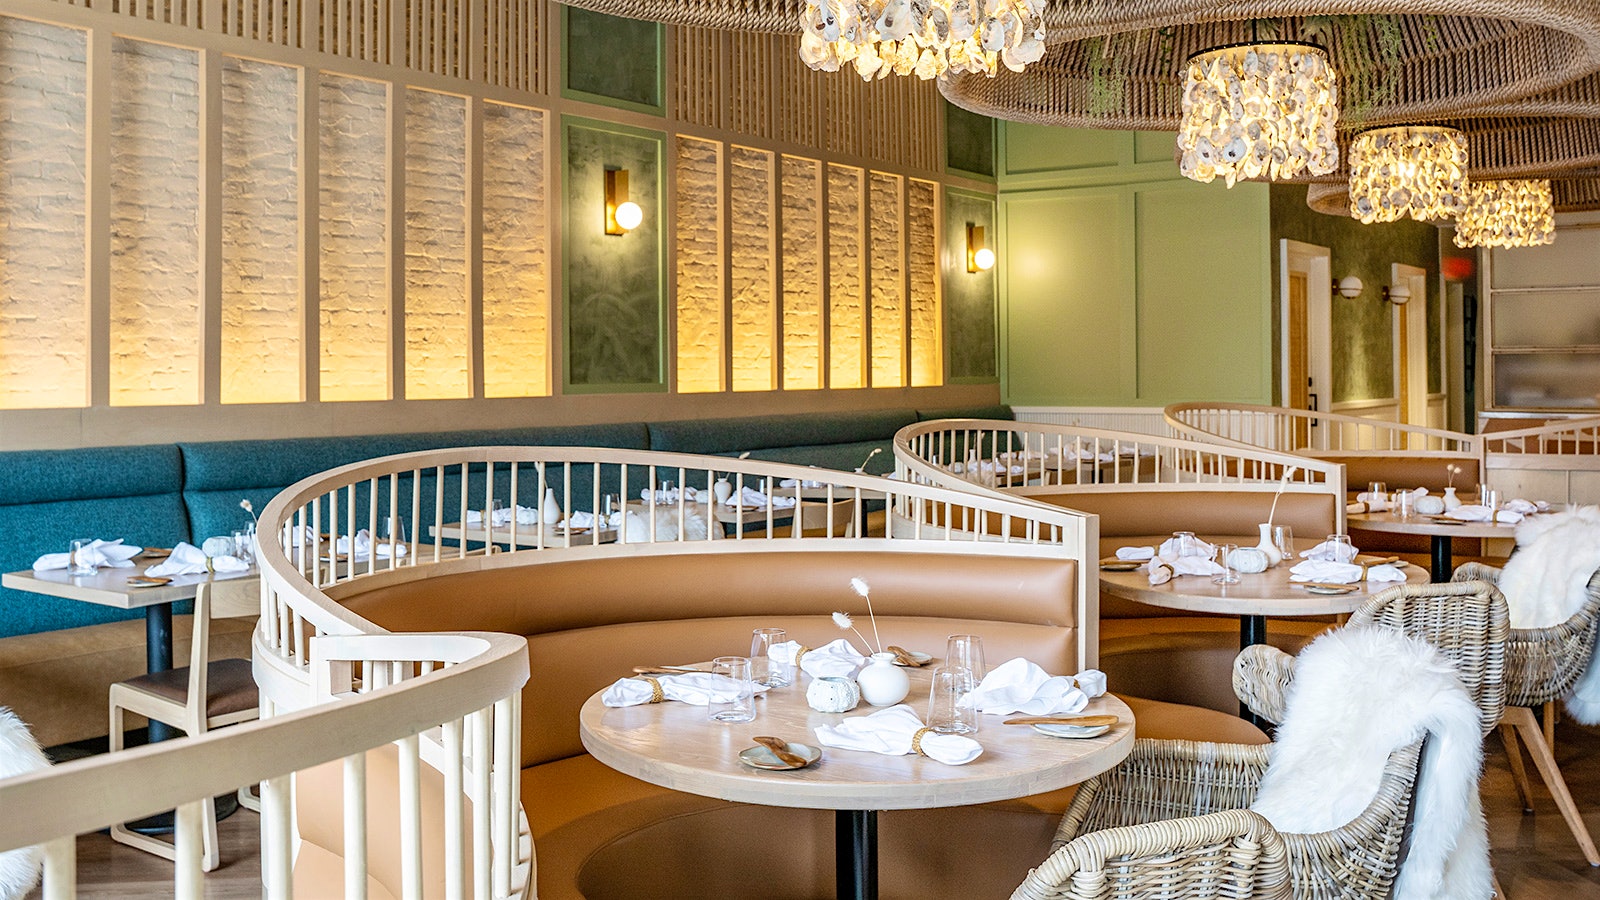  The dining room at Quarter Acre, with wicker chairs, tan booths and a white brick wall